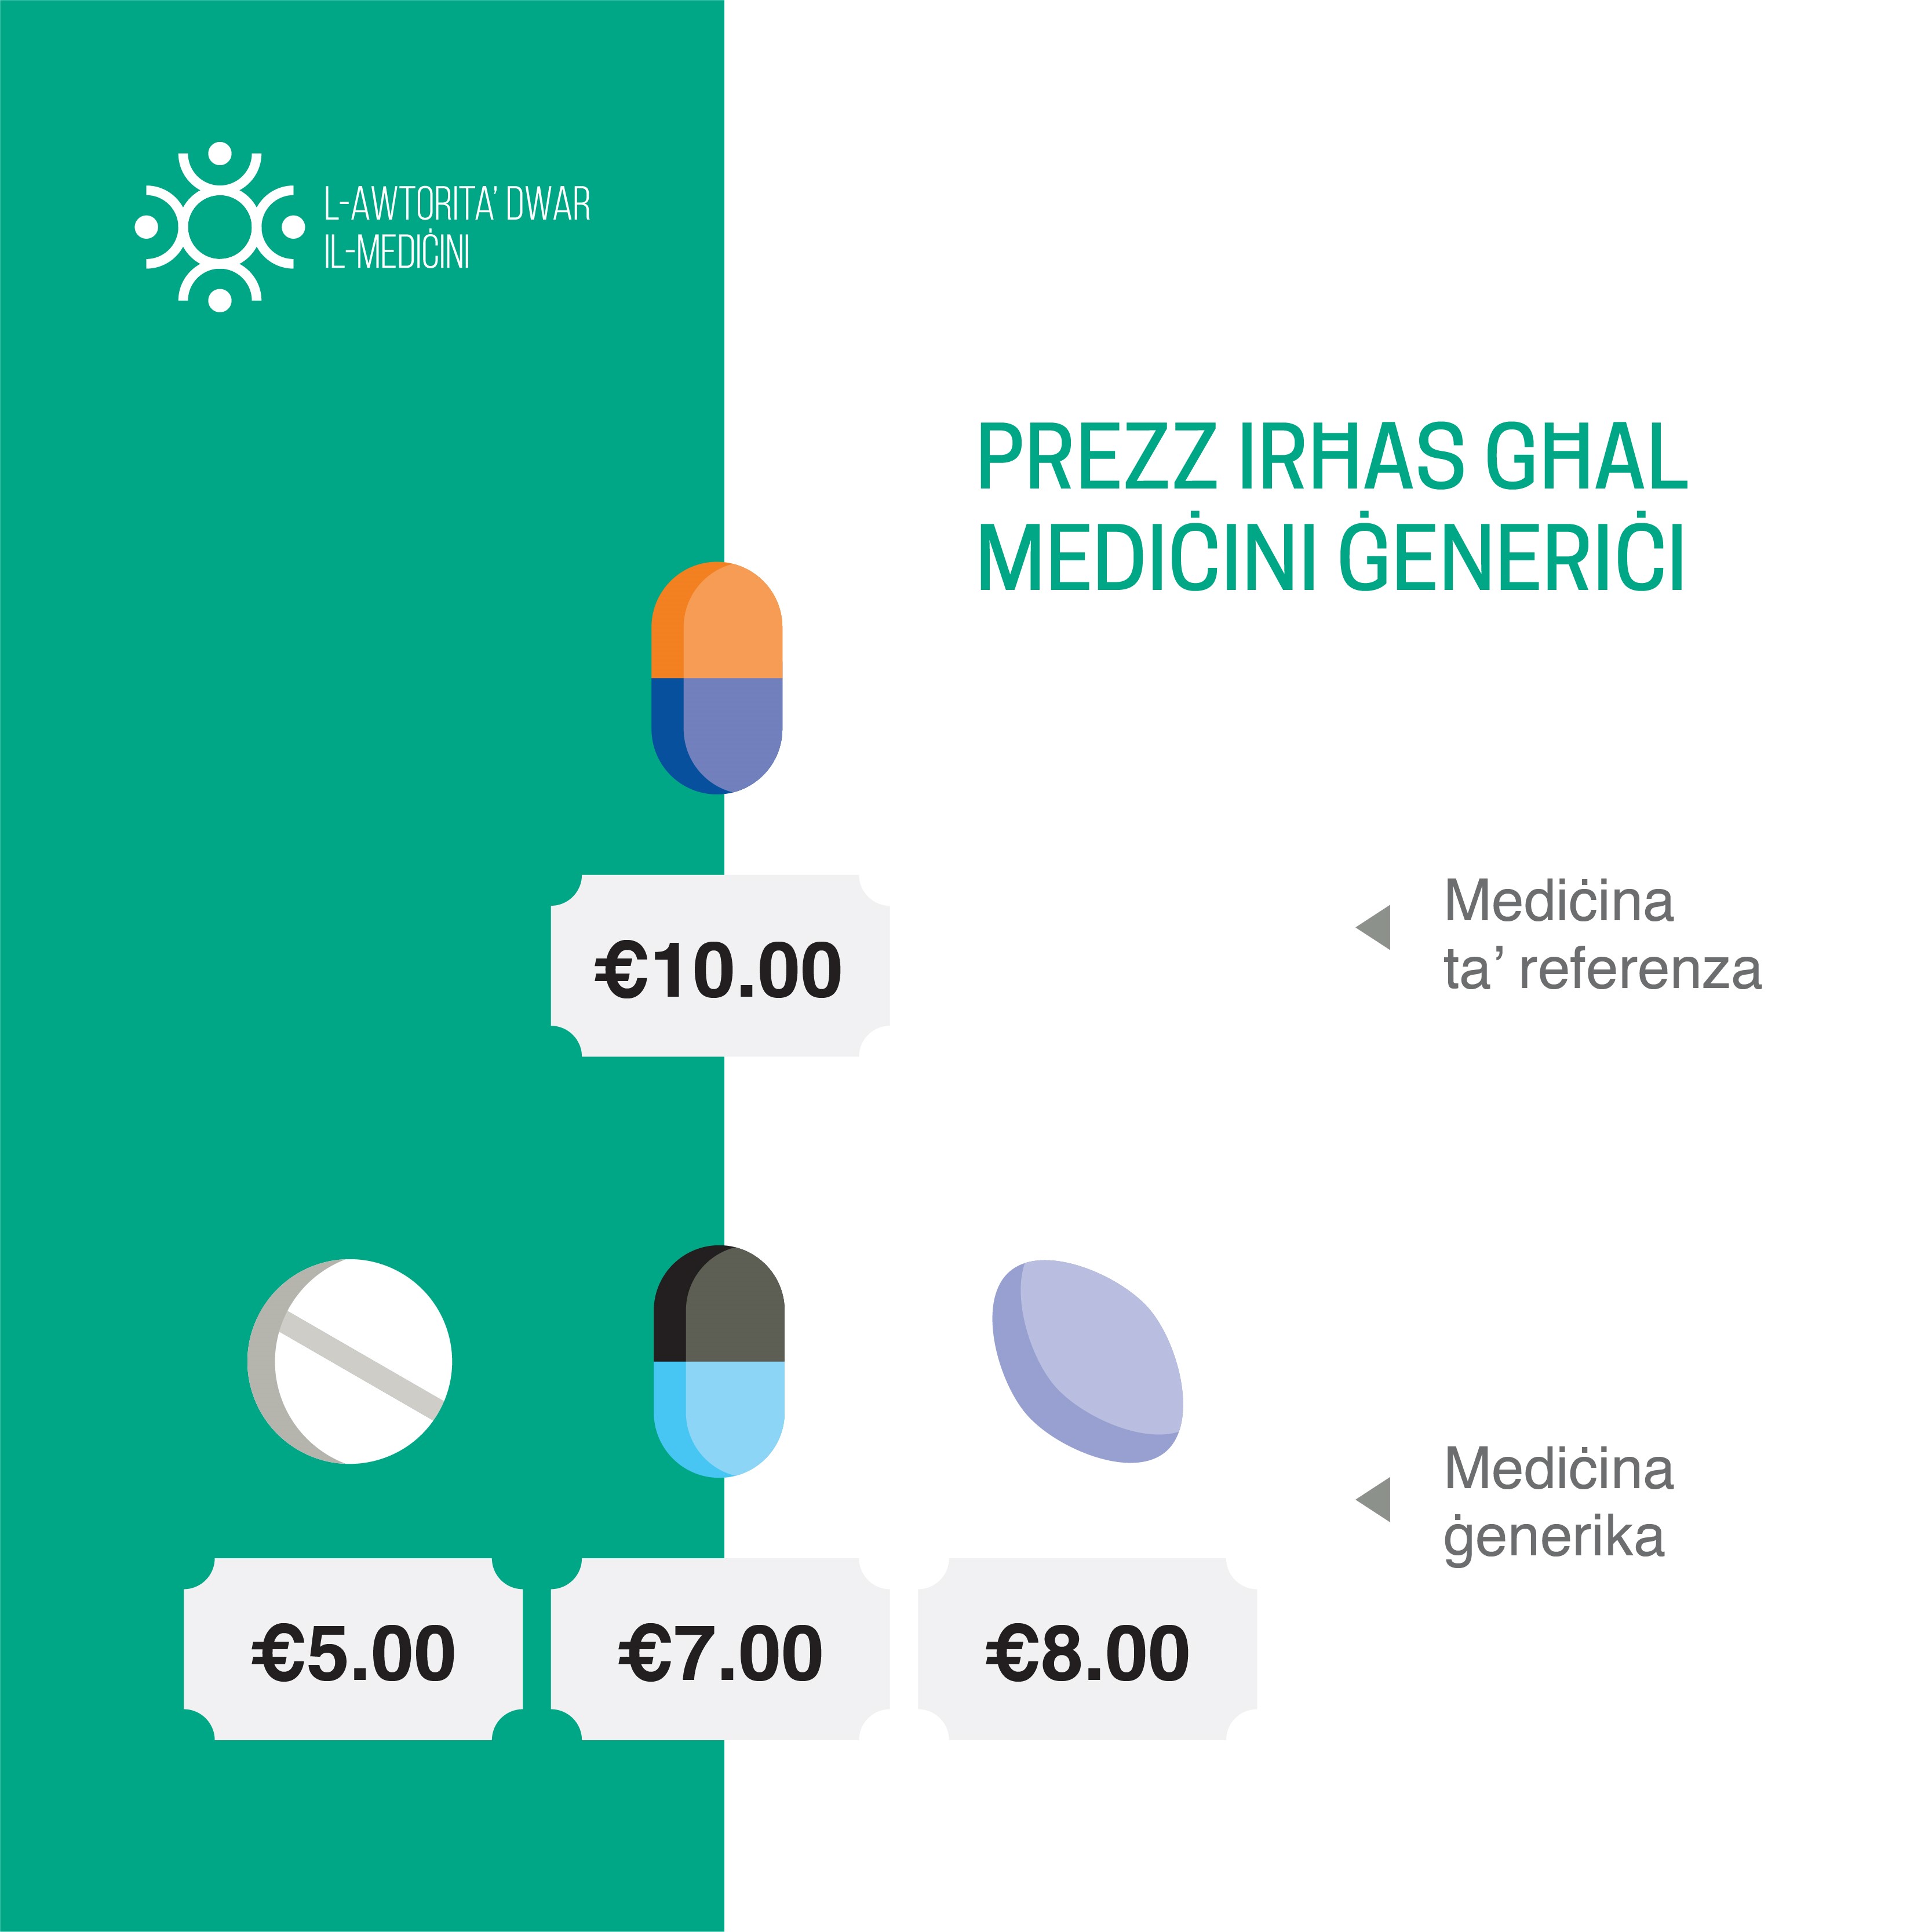 The Malta Medicines Authority Launches Information Campaign on Generic Medicines